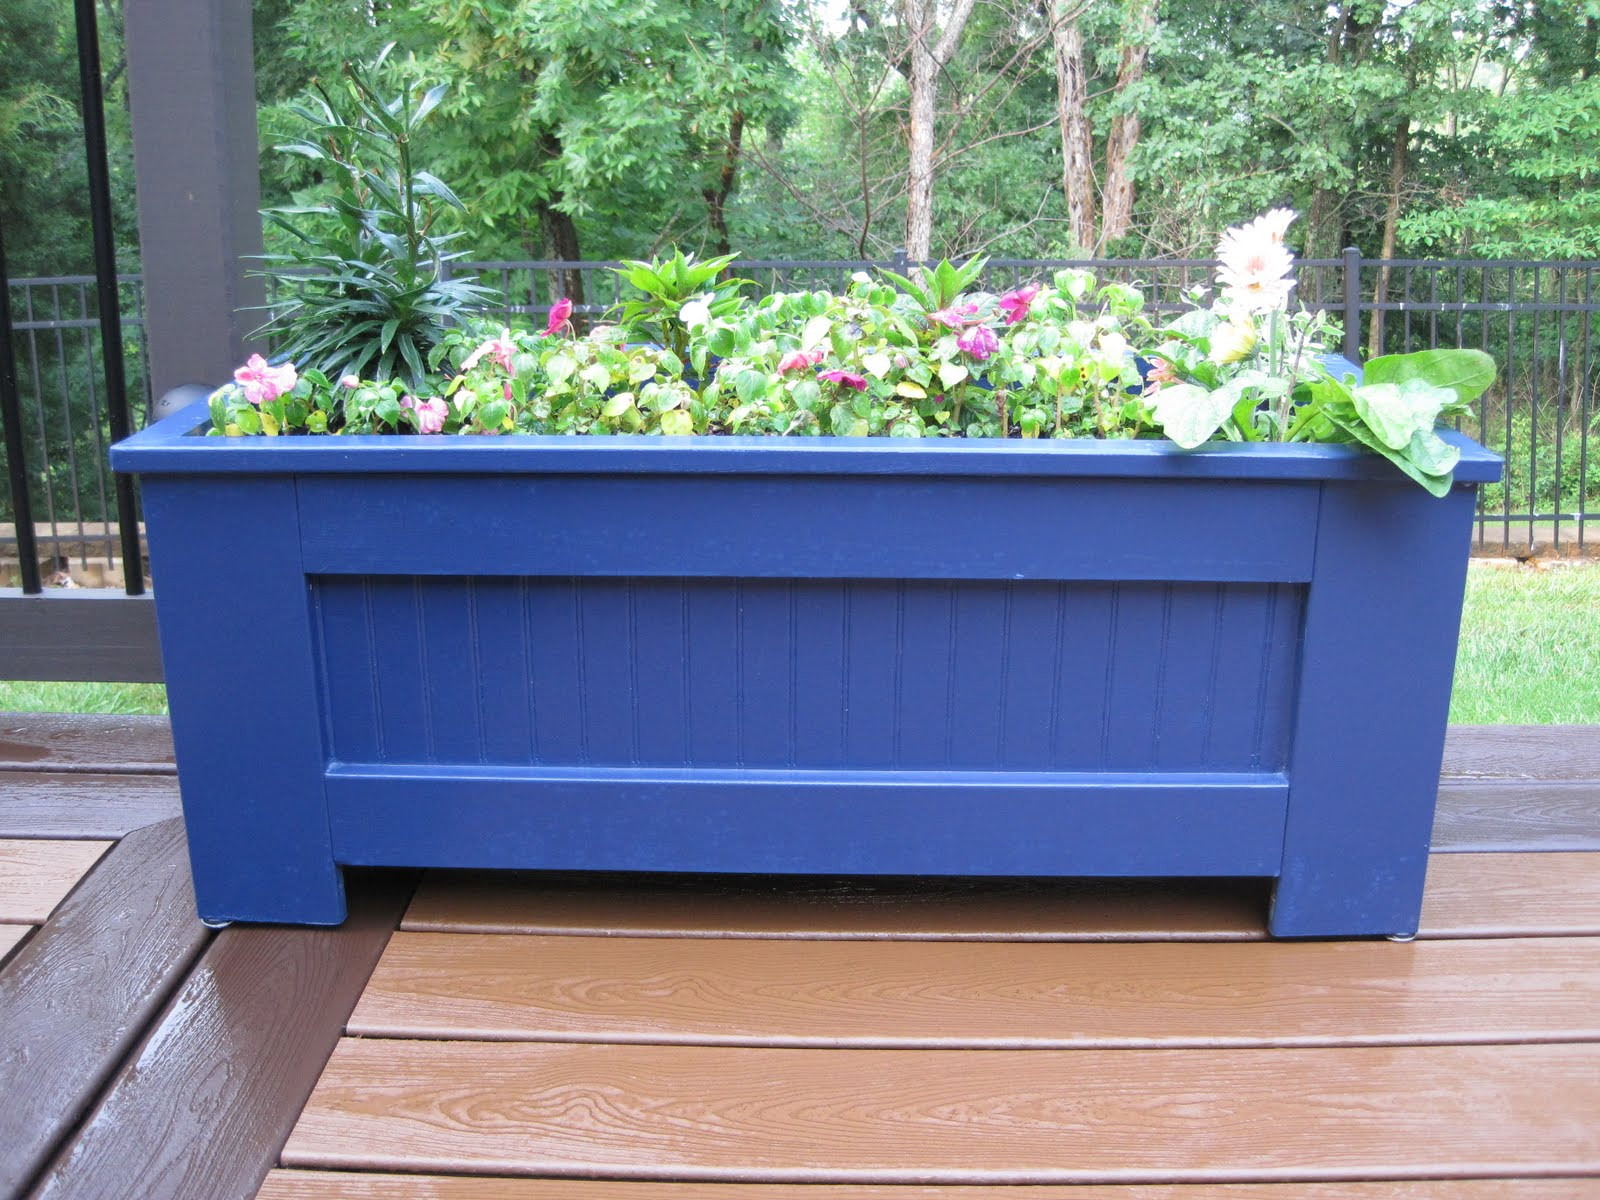 DIY Outdoor Planter Box
 SAVED BY GRACE DIY Planter Boxes